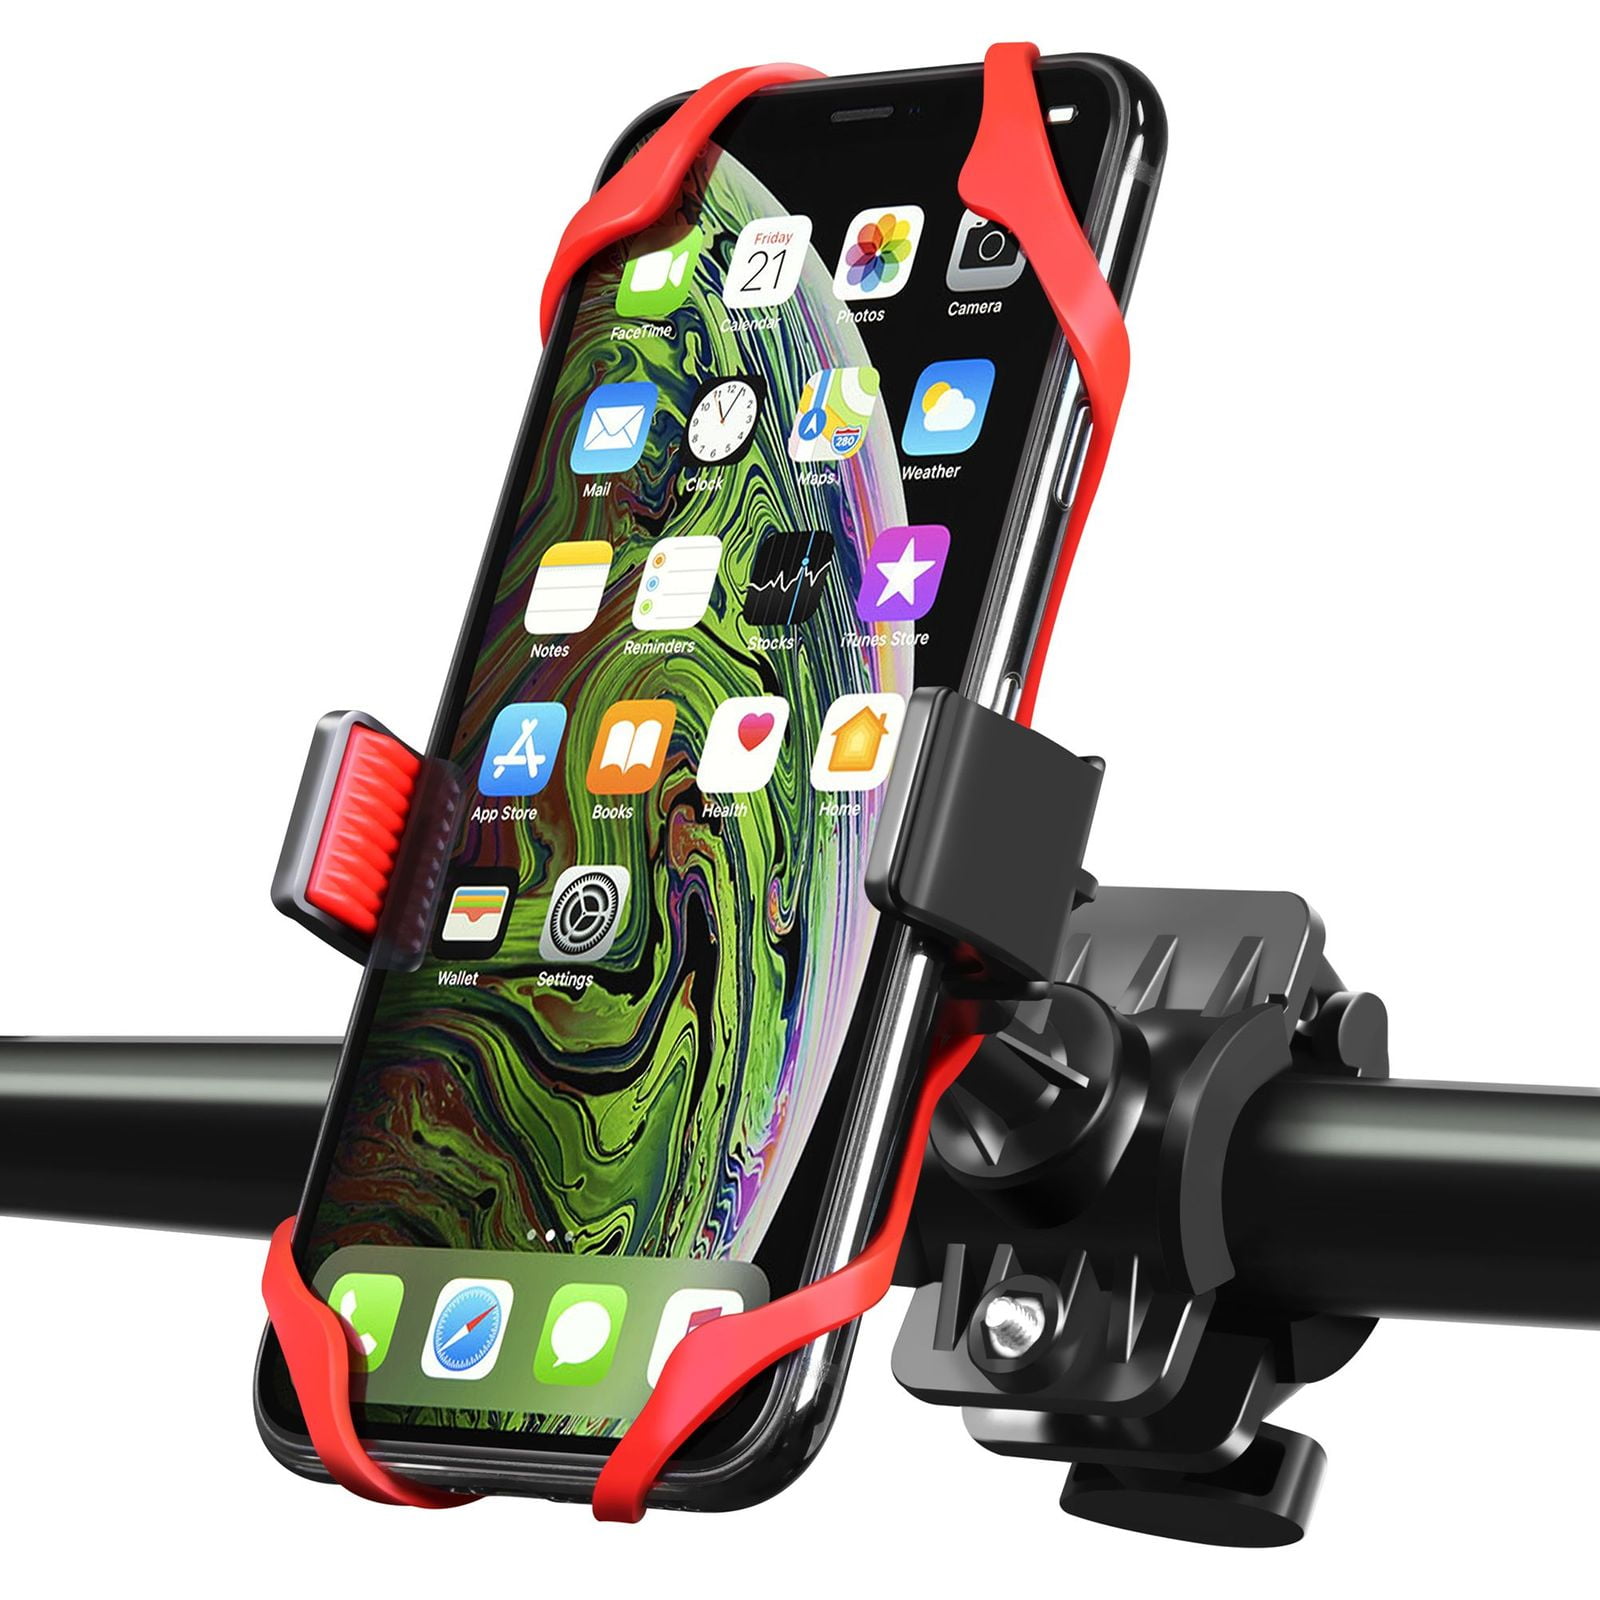 Insten Motorcycle Bicycle Phone Holder Mount with Grip, 360